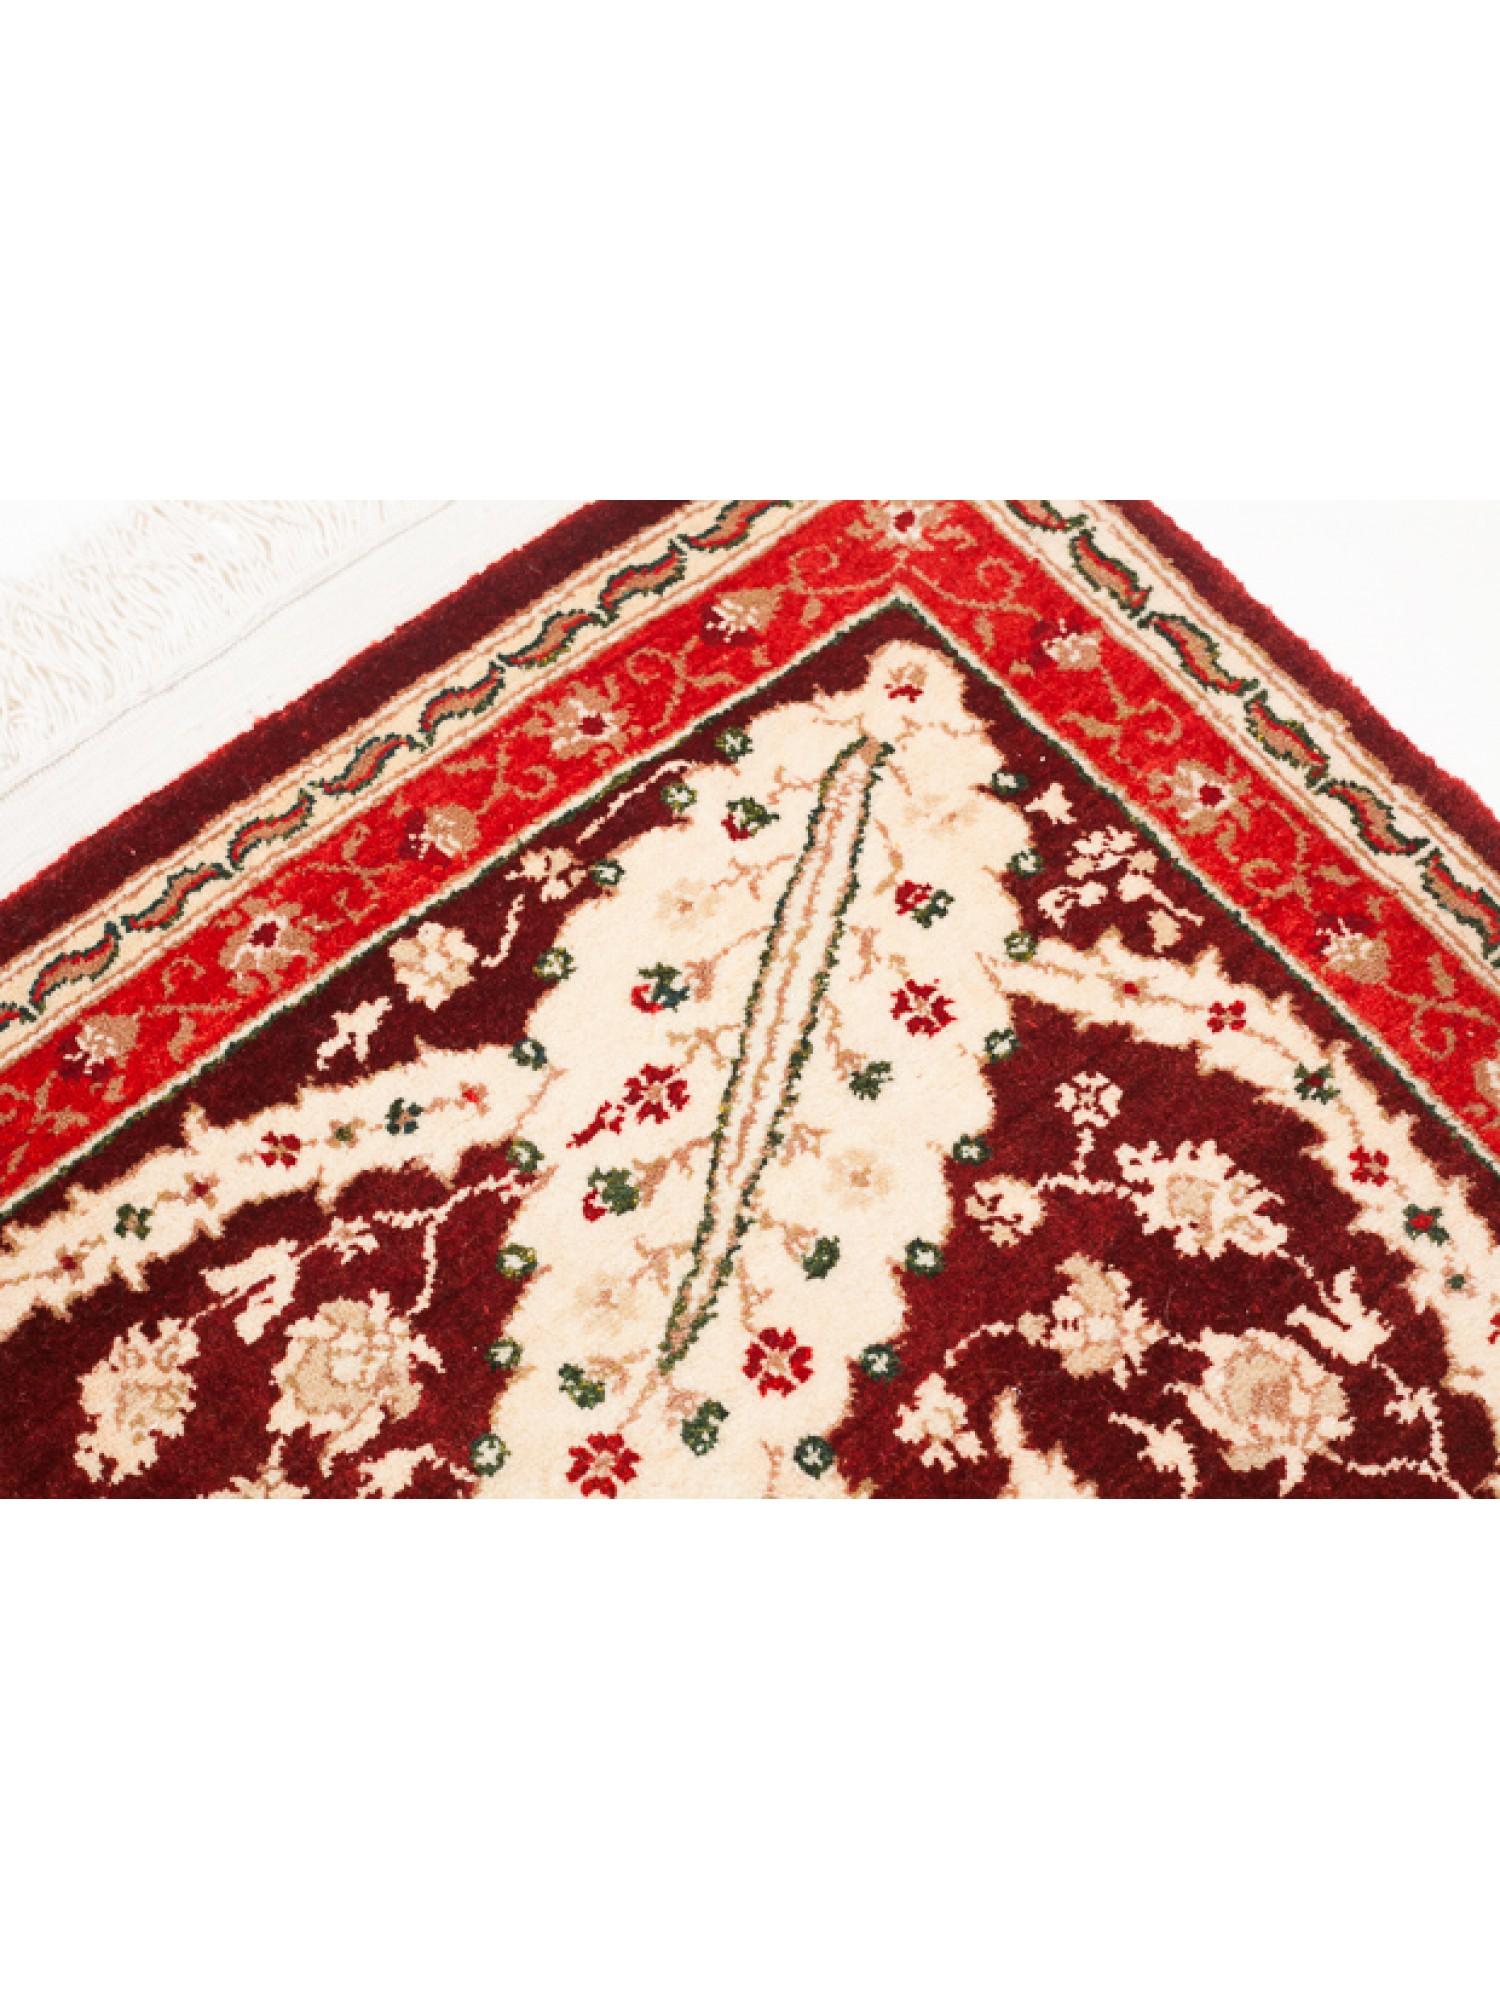 This unique Wool Hereke Carpet is among the highest-quality carpets in the Hereke workshop. There is a flower lattice on a white background with the fineness of the weave, the use of color, and the elegant and sophisticated design. It is a piece